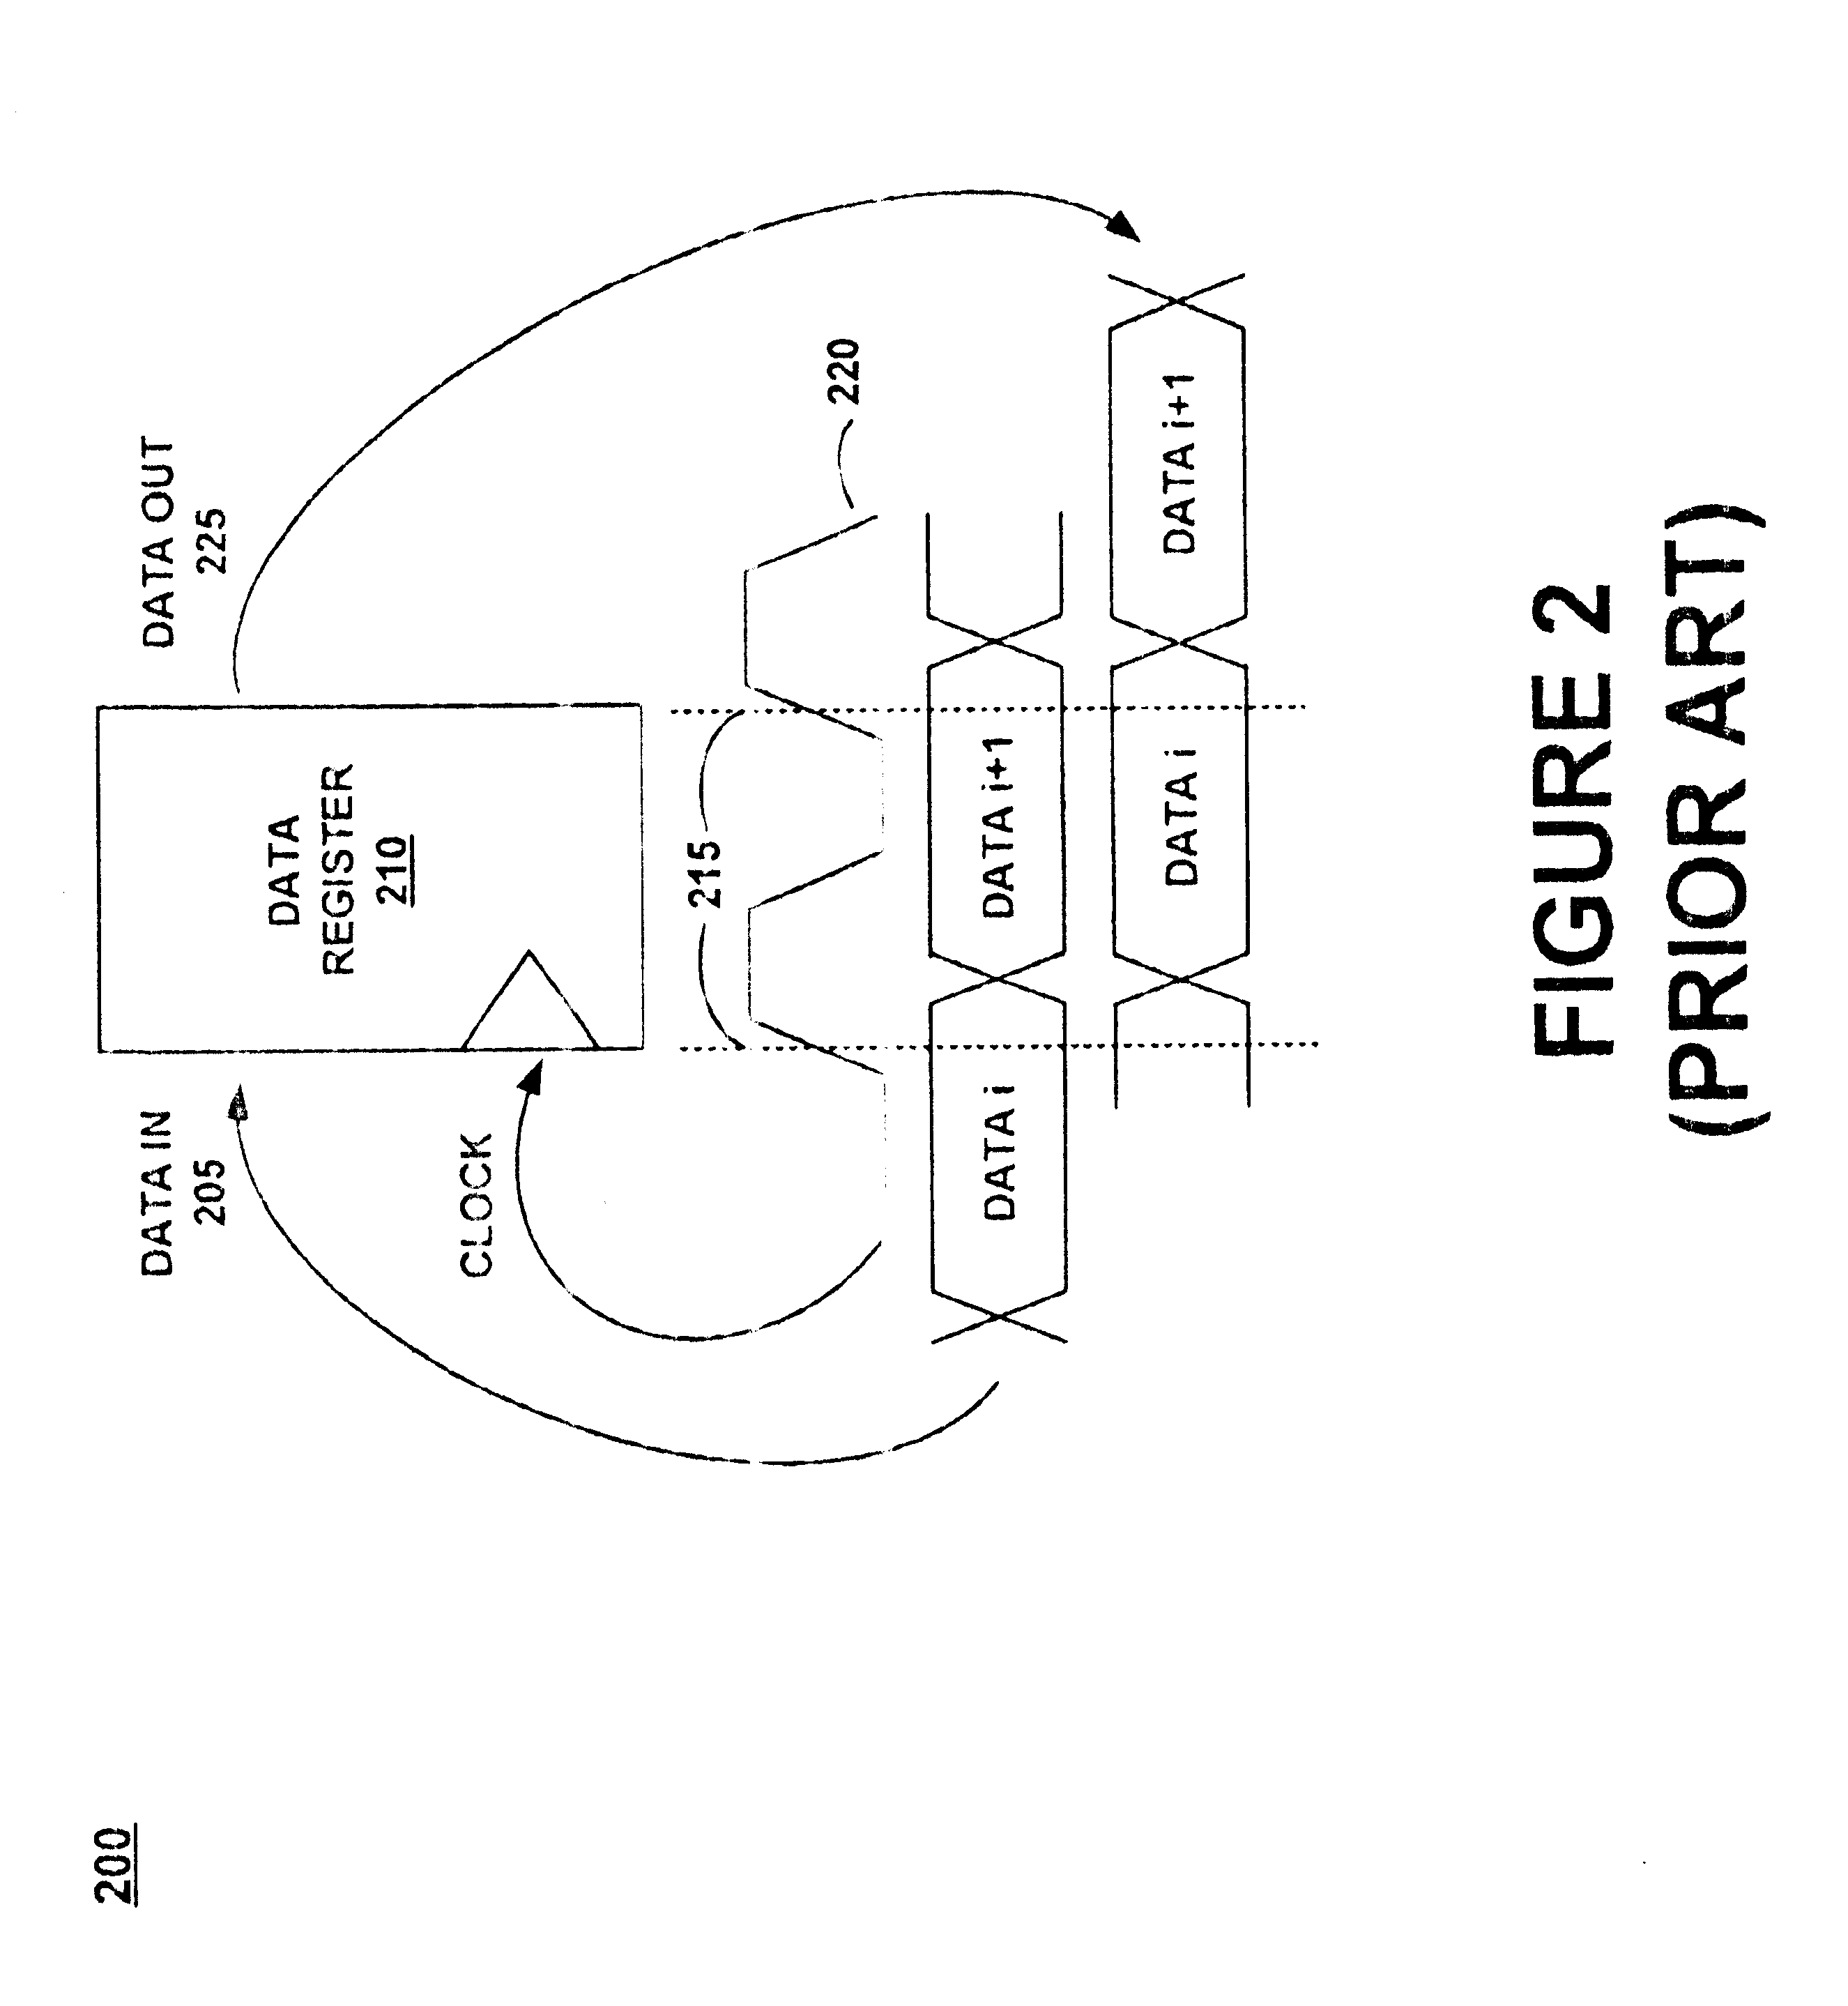 Dynamically reconfigurable precision signal delay test system for automatic test equipment